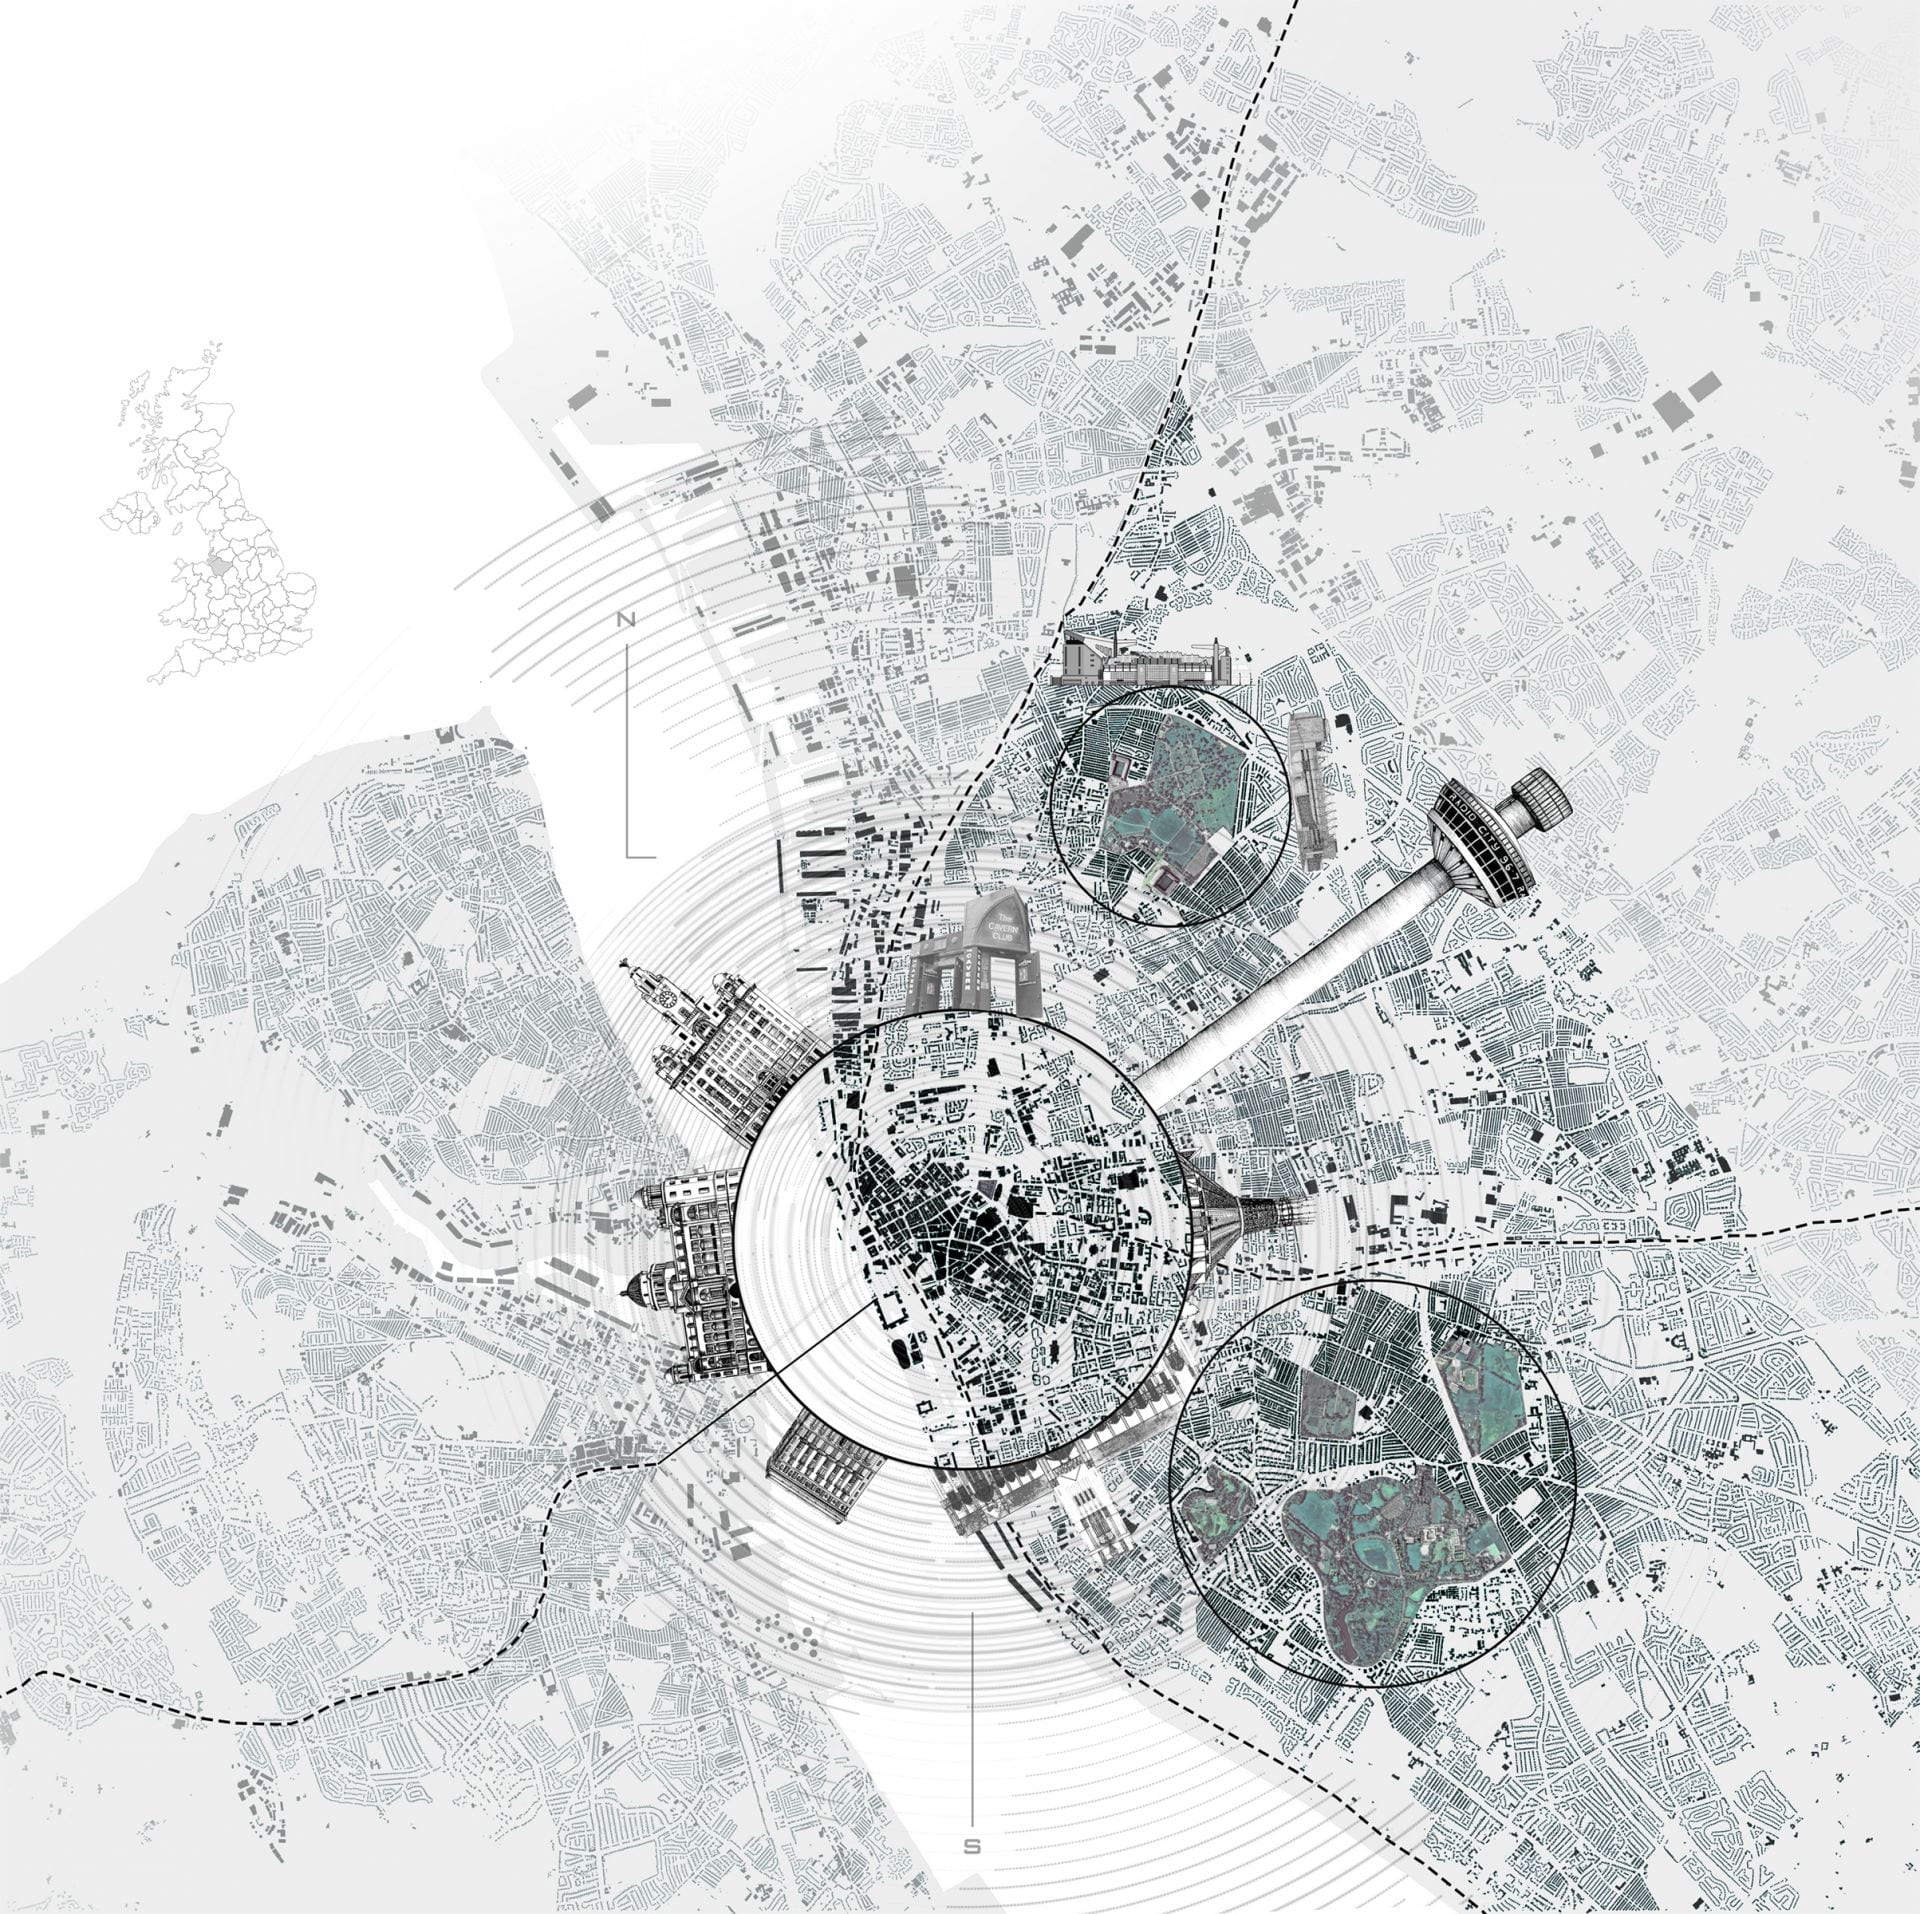 Graphic of map depicting green spaces and definitive architecture in Liverpool.